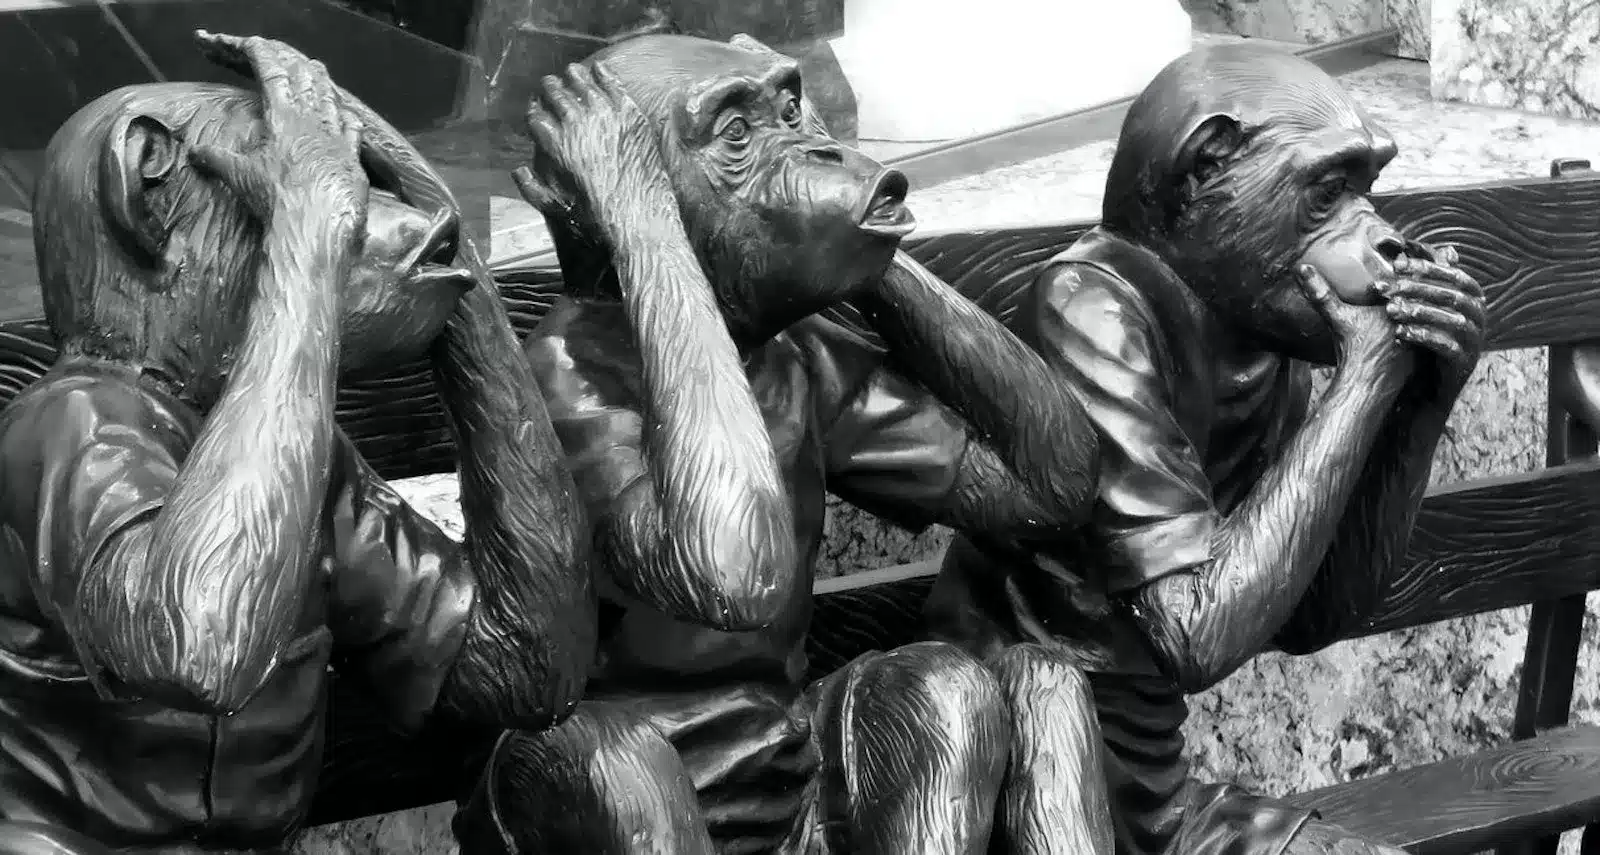 Three monkeys on a bench, hands on heads, pondering love's complexities, wrestling doubts and fears, seeking genuine connection